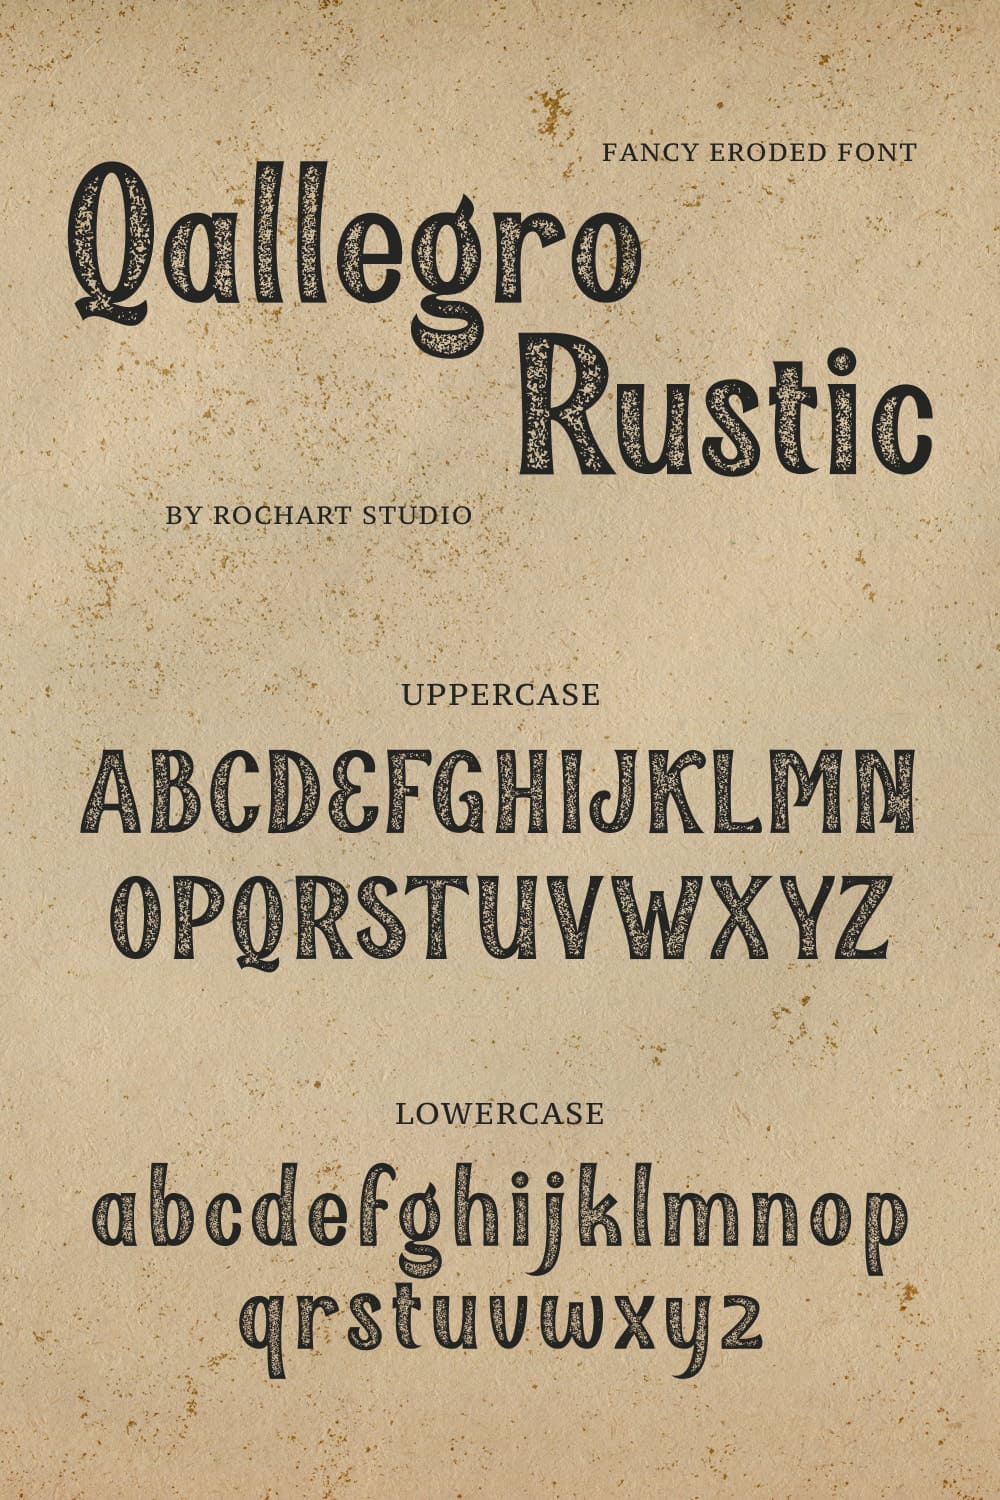 Qallegro rustic free font Pinterest lowercase and uppercase preview.